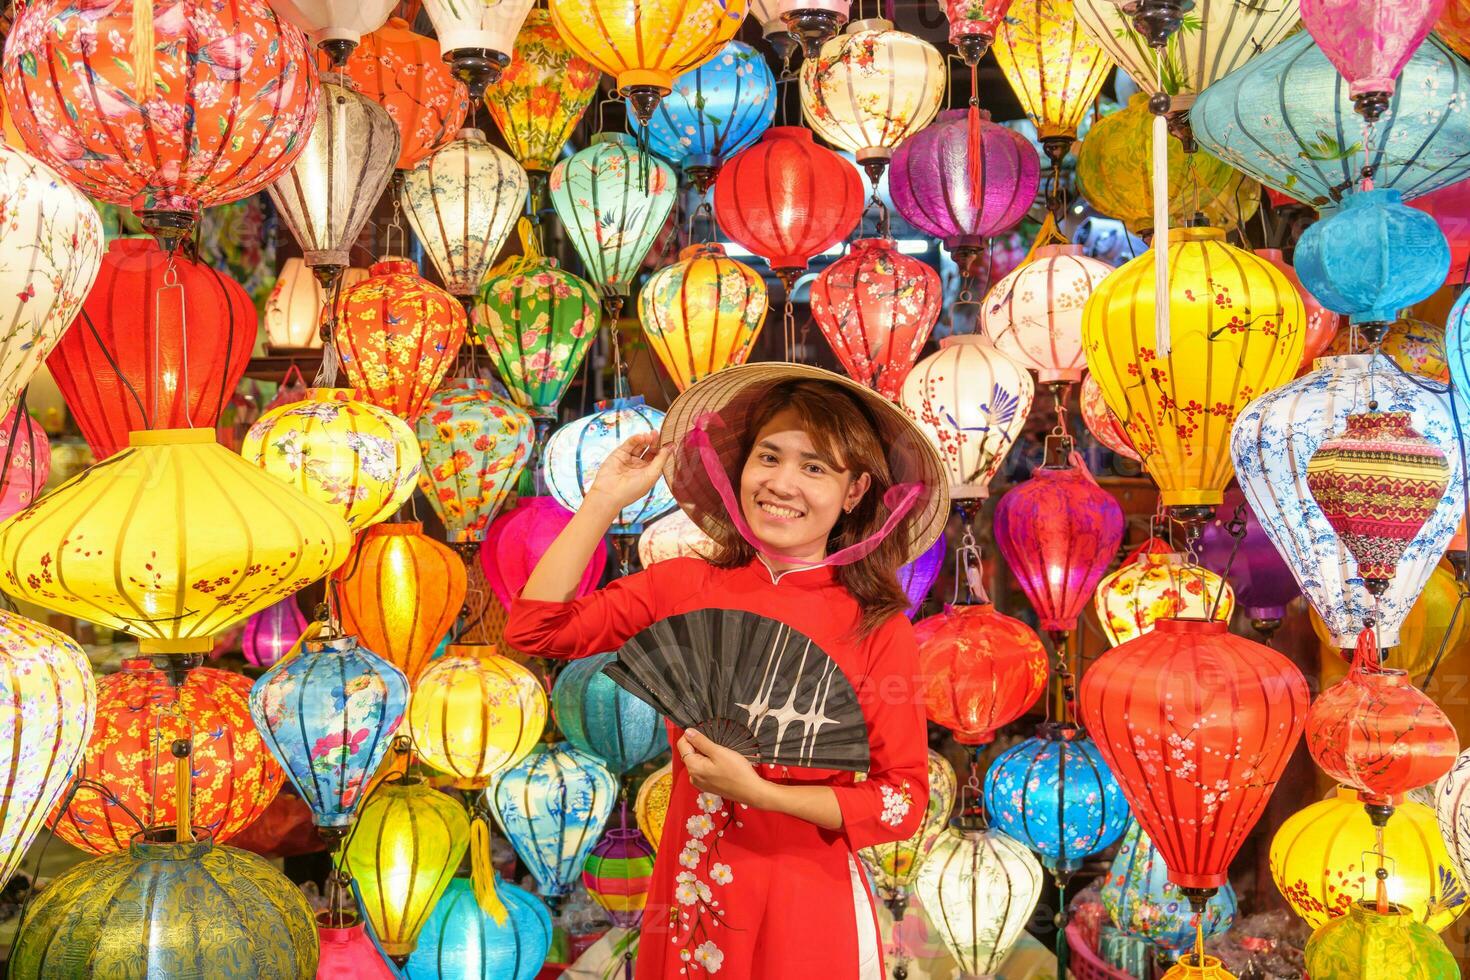 happy woman wearing Ao Dai Vietnamese dress with colorful lanterns, traveler sightseeing at Hoi An ancient town in central Vietnam.landmark for tourist attractions.Vietnam and Southeast travel concept photo